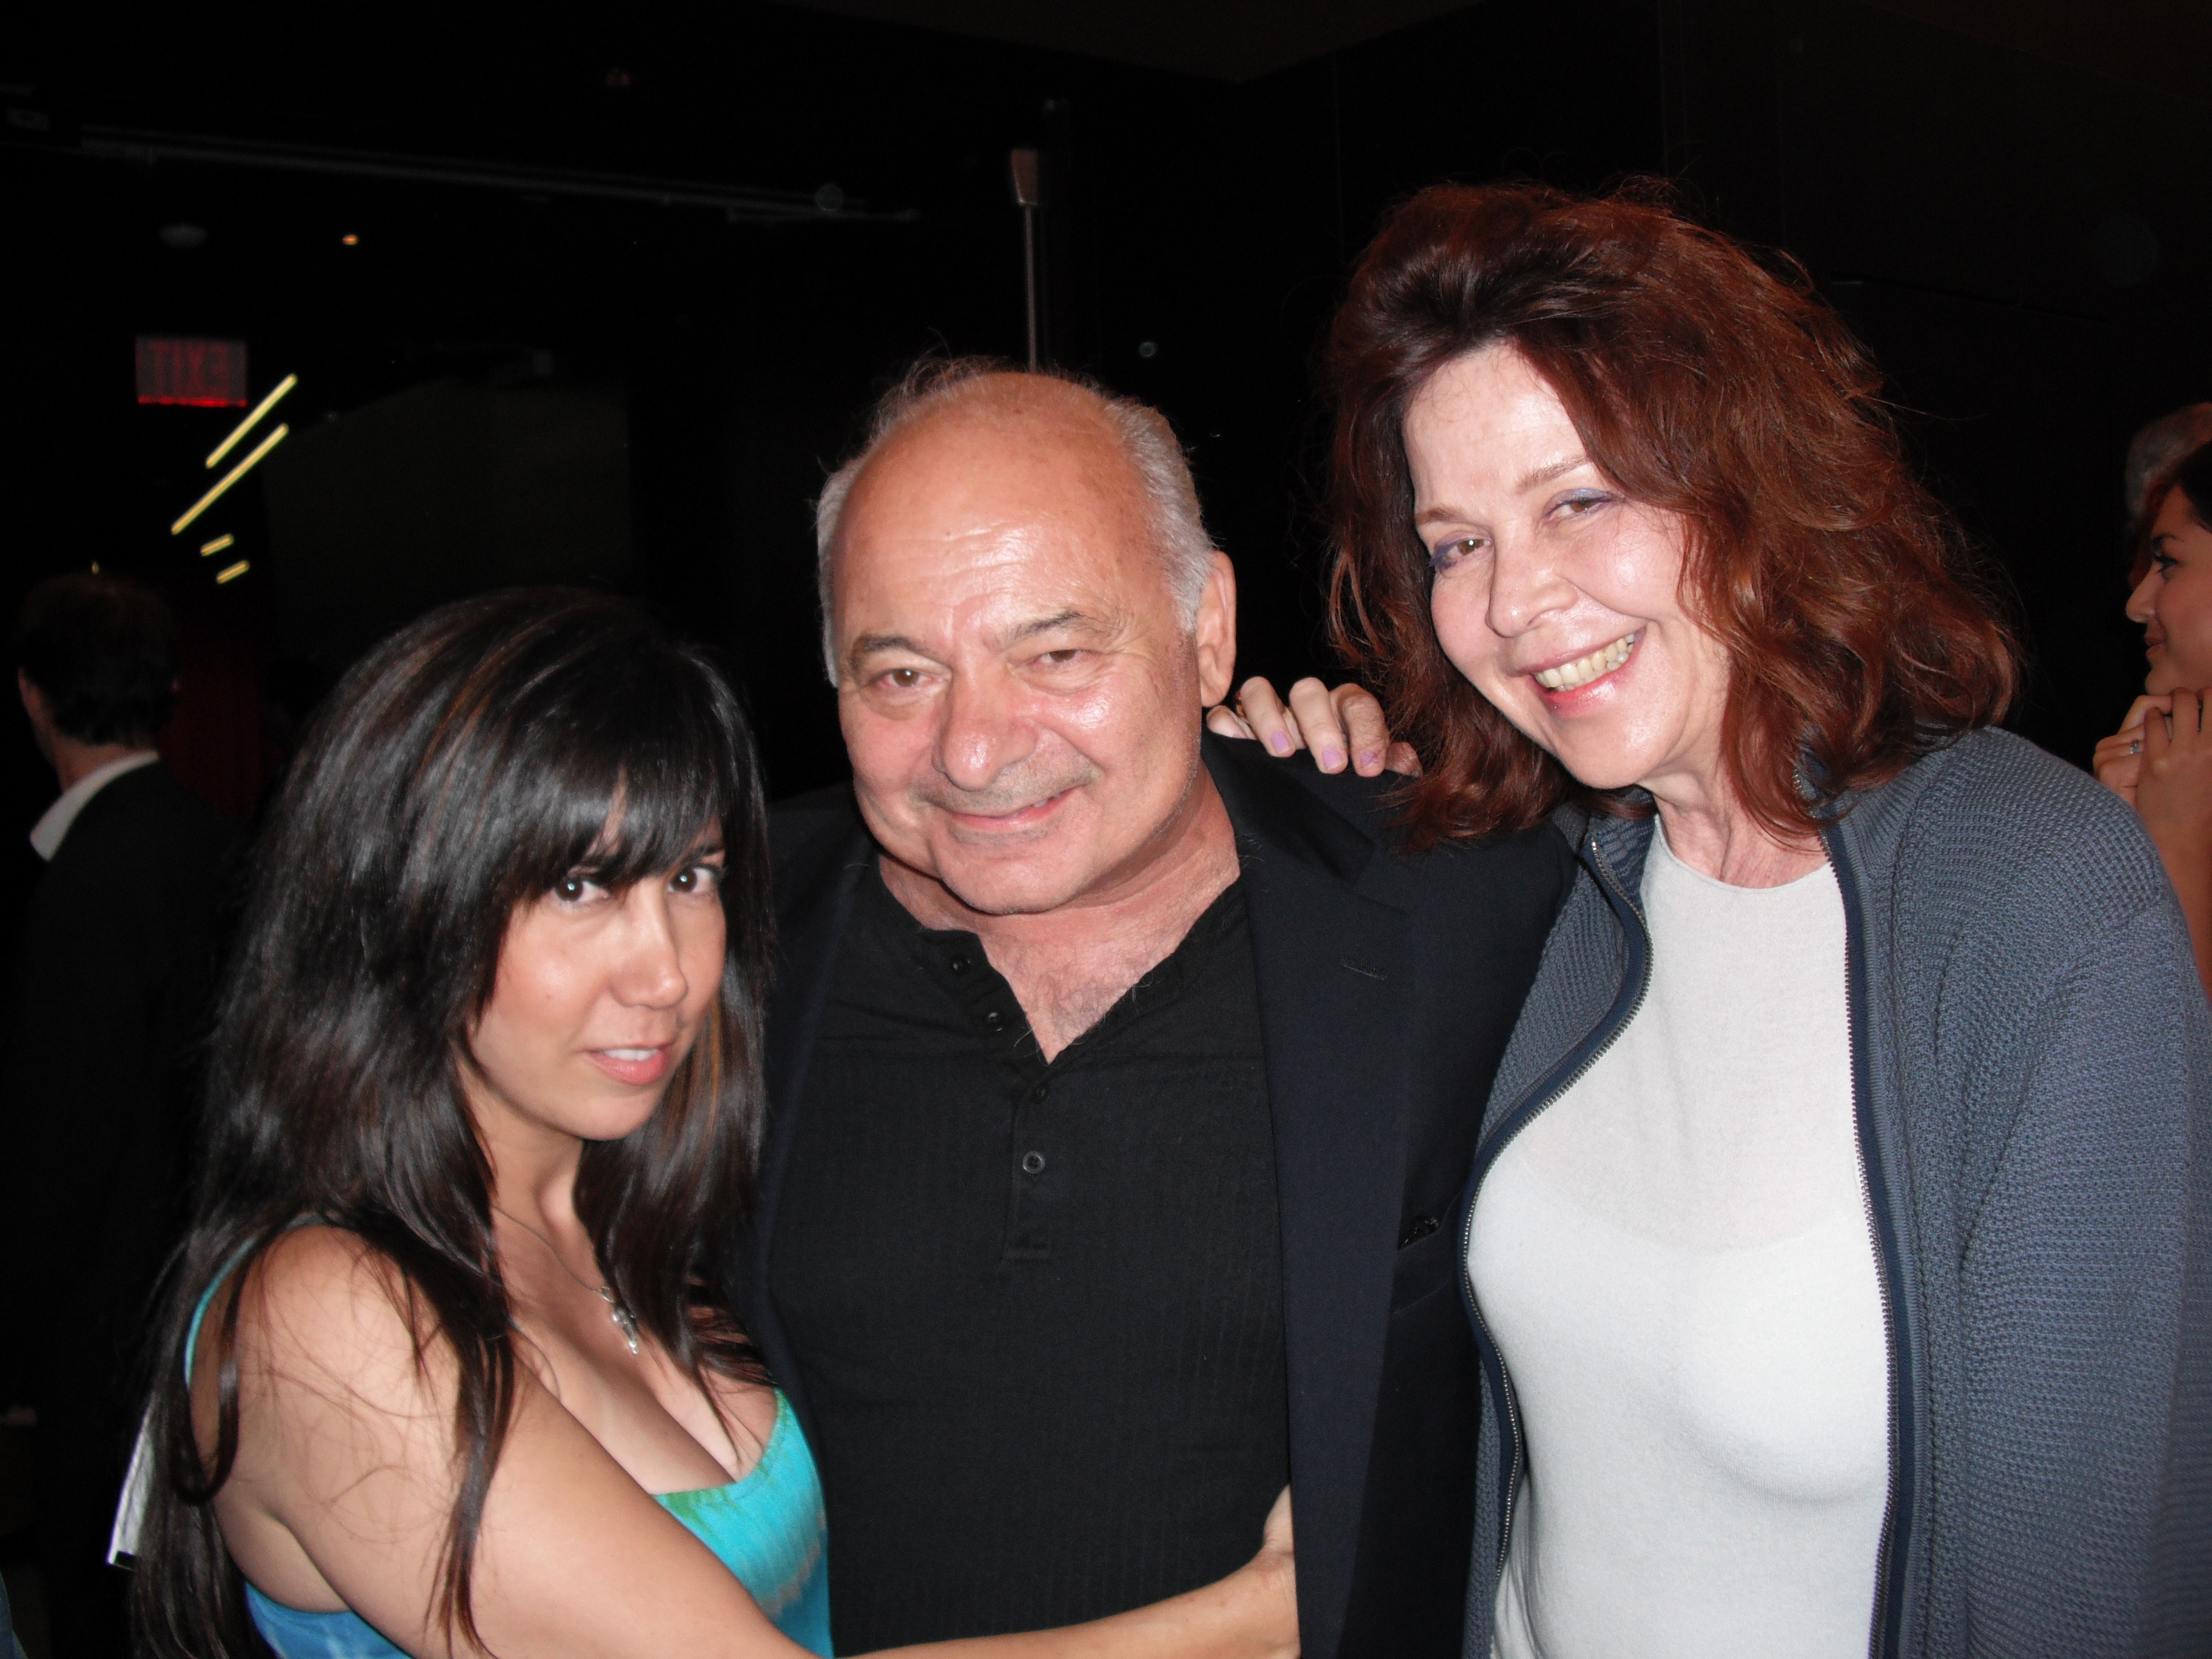 Joy Ferro Moore, Burt Young, Samantha Harper Macy at Lookin To Get Out Premiere screening 6/29/9